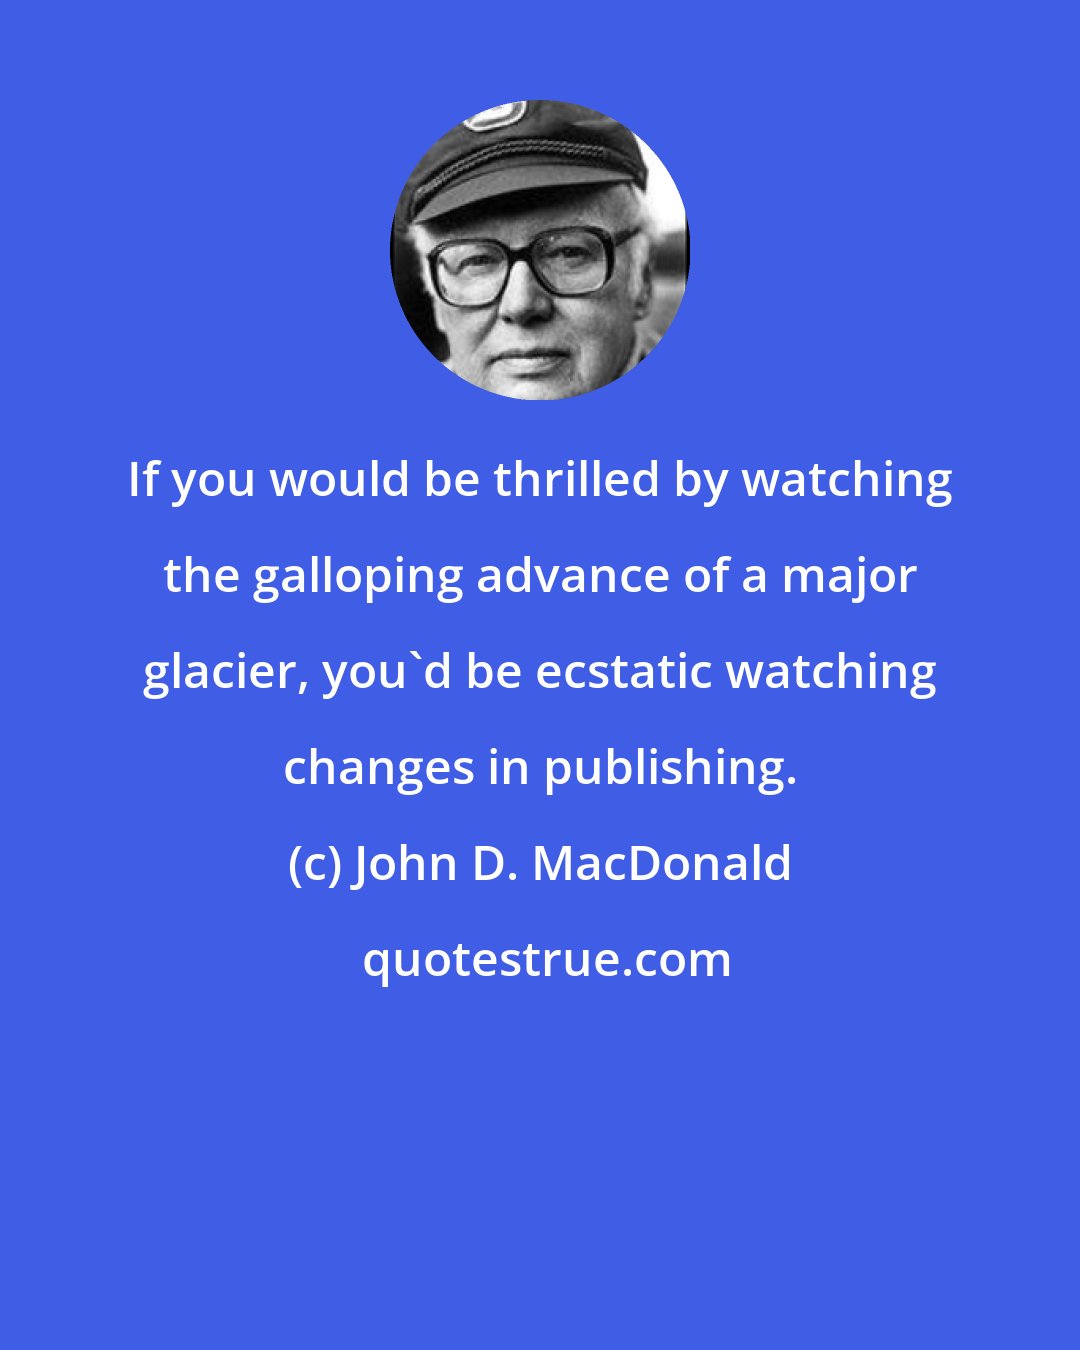 John D. MacDonald: If you would be thrilled by watching the galloping advance of a major glacier, you'd be ecstatic watching changes in publishing.